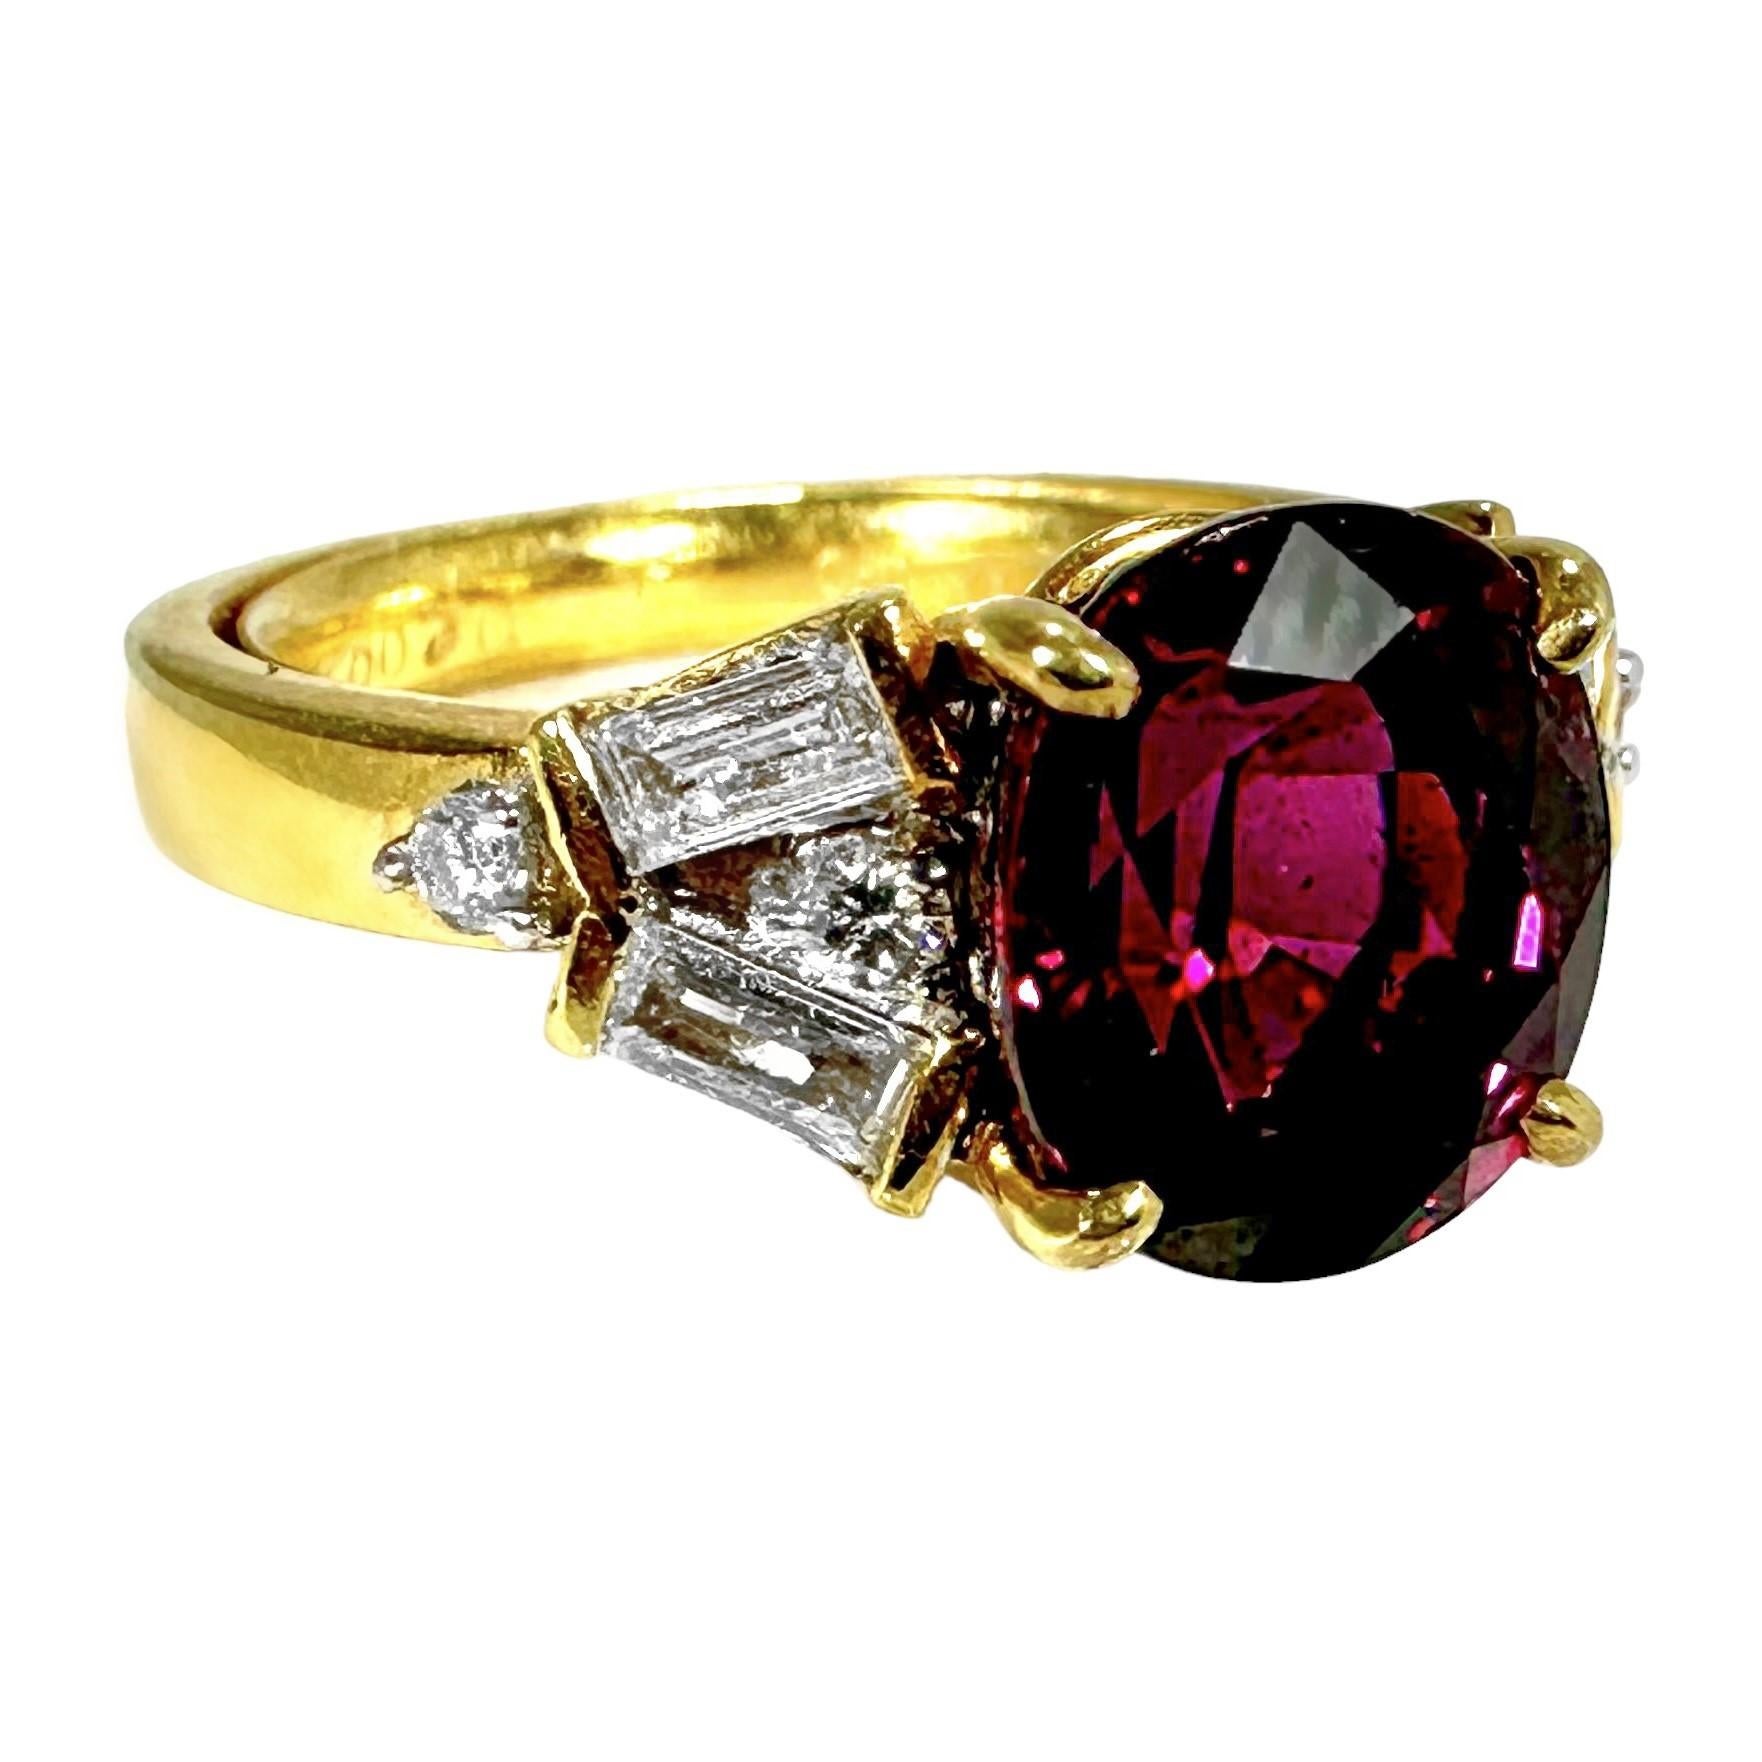 Brilliant Cut 18k Yellow Gold Ring with 4.76ct Red Wine Colored, Oval Shaped Garnet & Diamonds For Sale